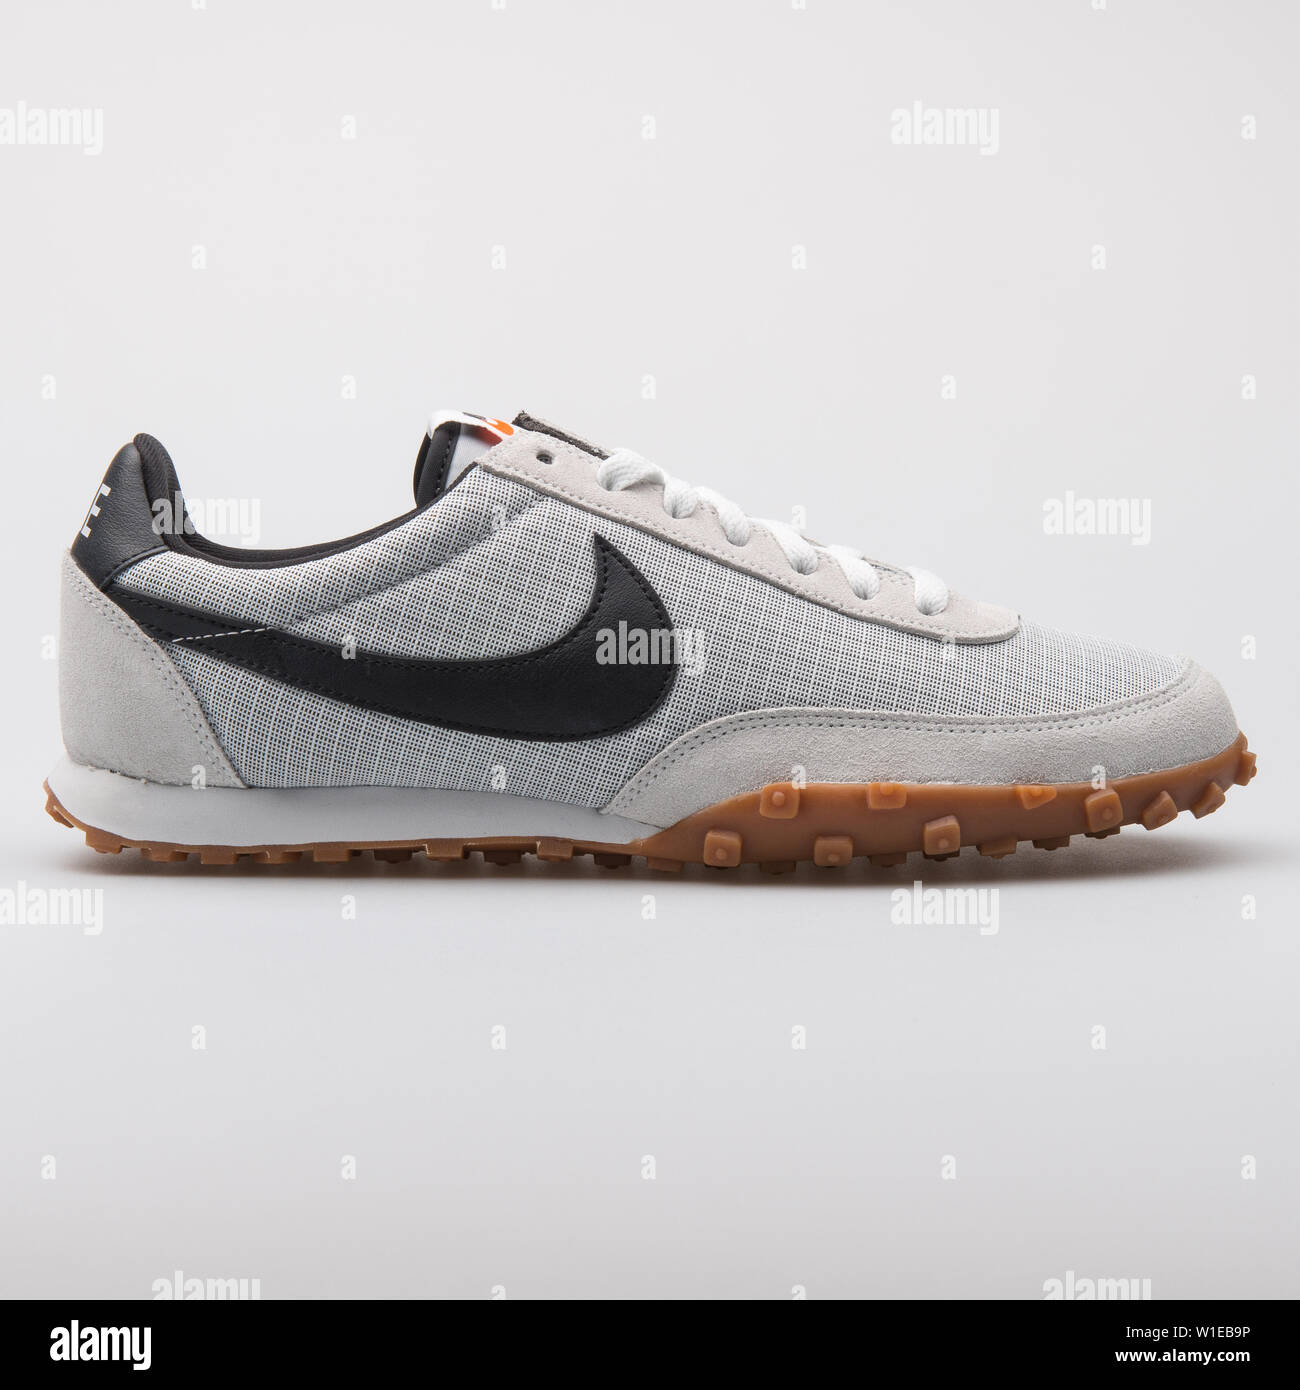 VIENNA, AUSTRIA - AUGUST 7, 2017: Nike Waffle Racer 17 grey, off white and  black sneaker on white background Stock Photo - Alamy